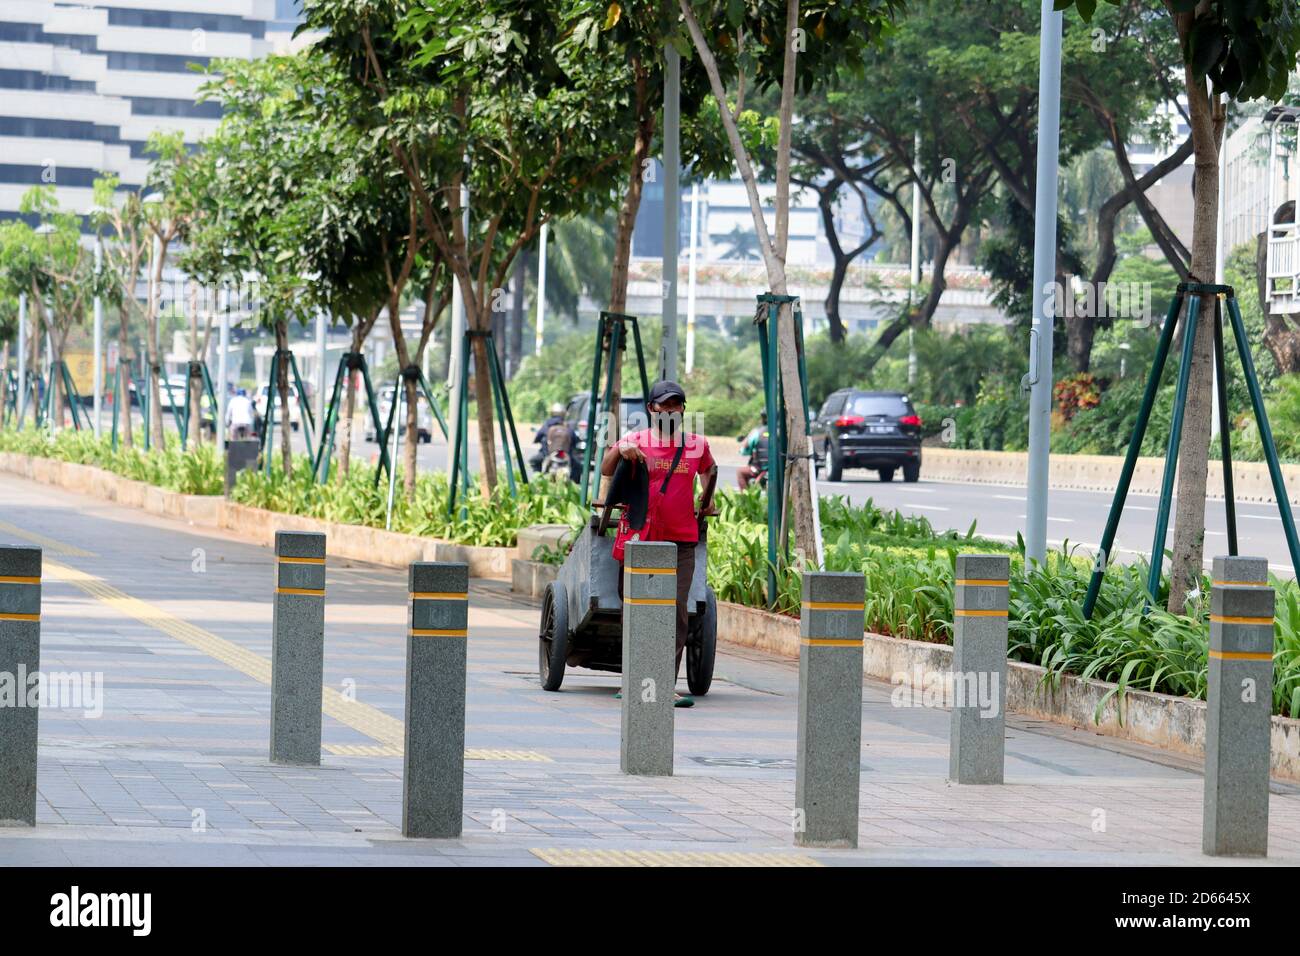 Jakarta / Indonesia - September 5, 2020. a man in red who is pulling a cart on the pedestrian street of Sudirman, Jakarta Stock Photo